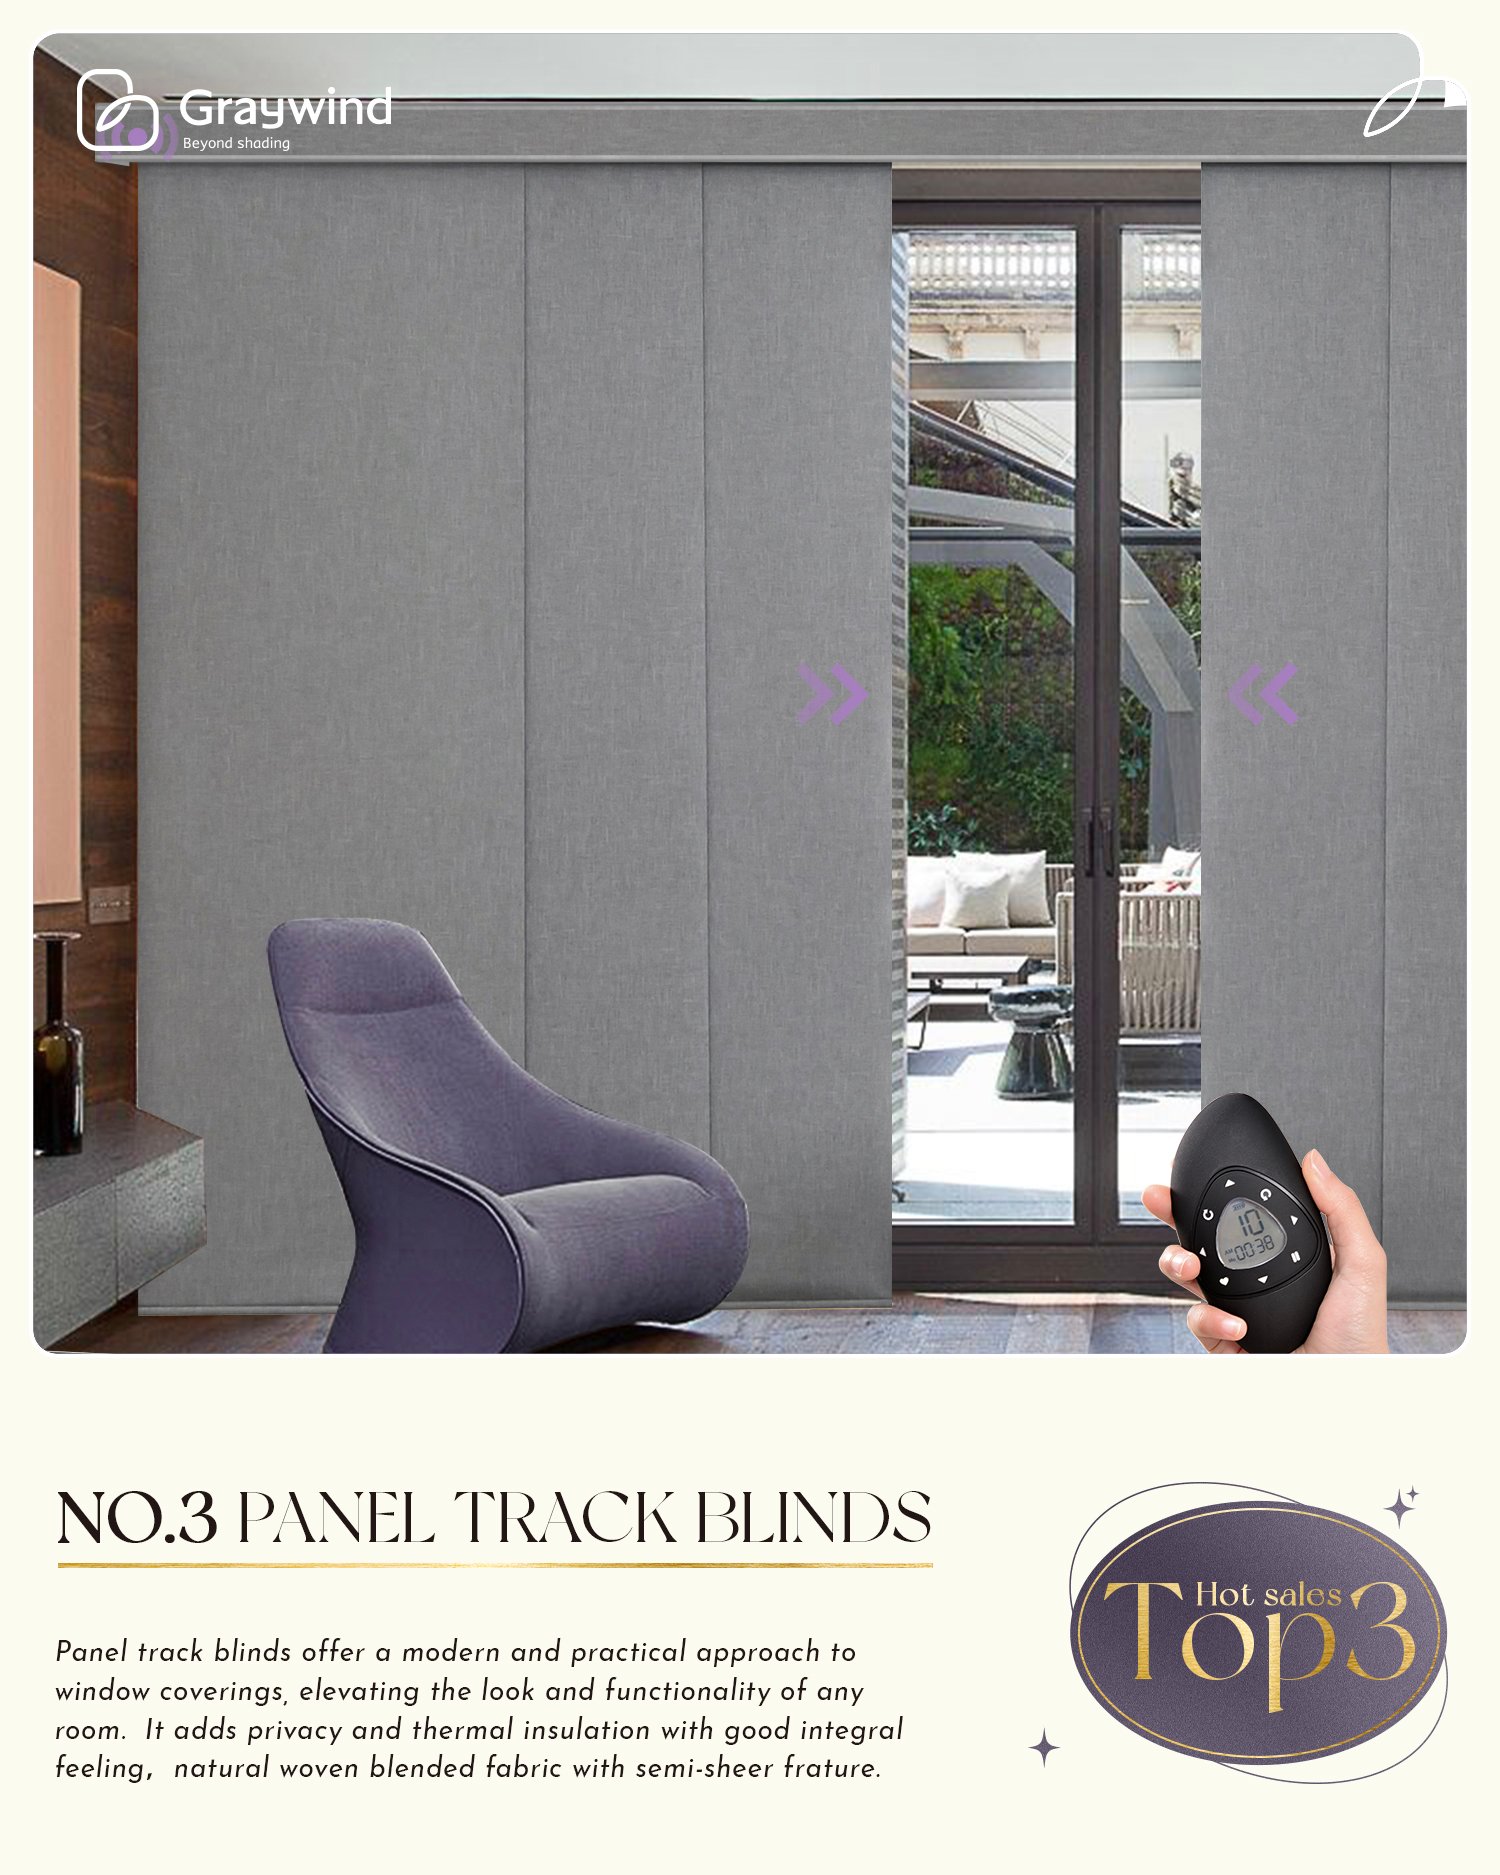 NO. 3 Panel track blinds